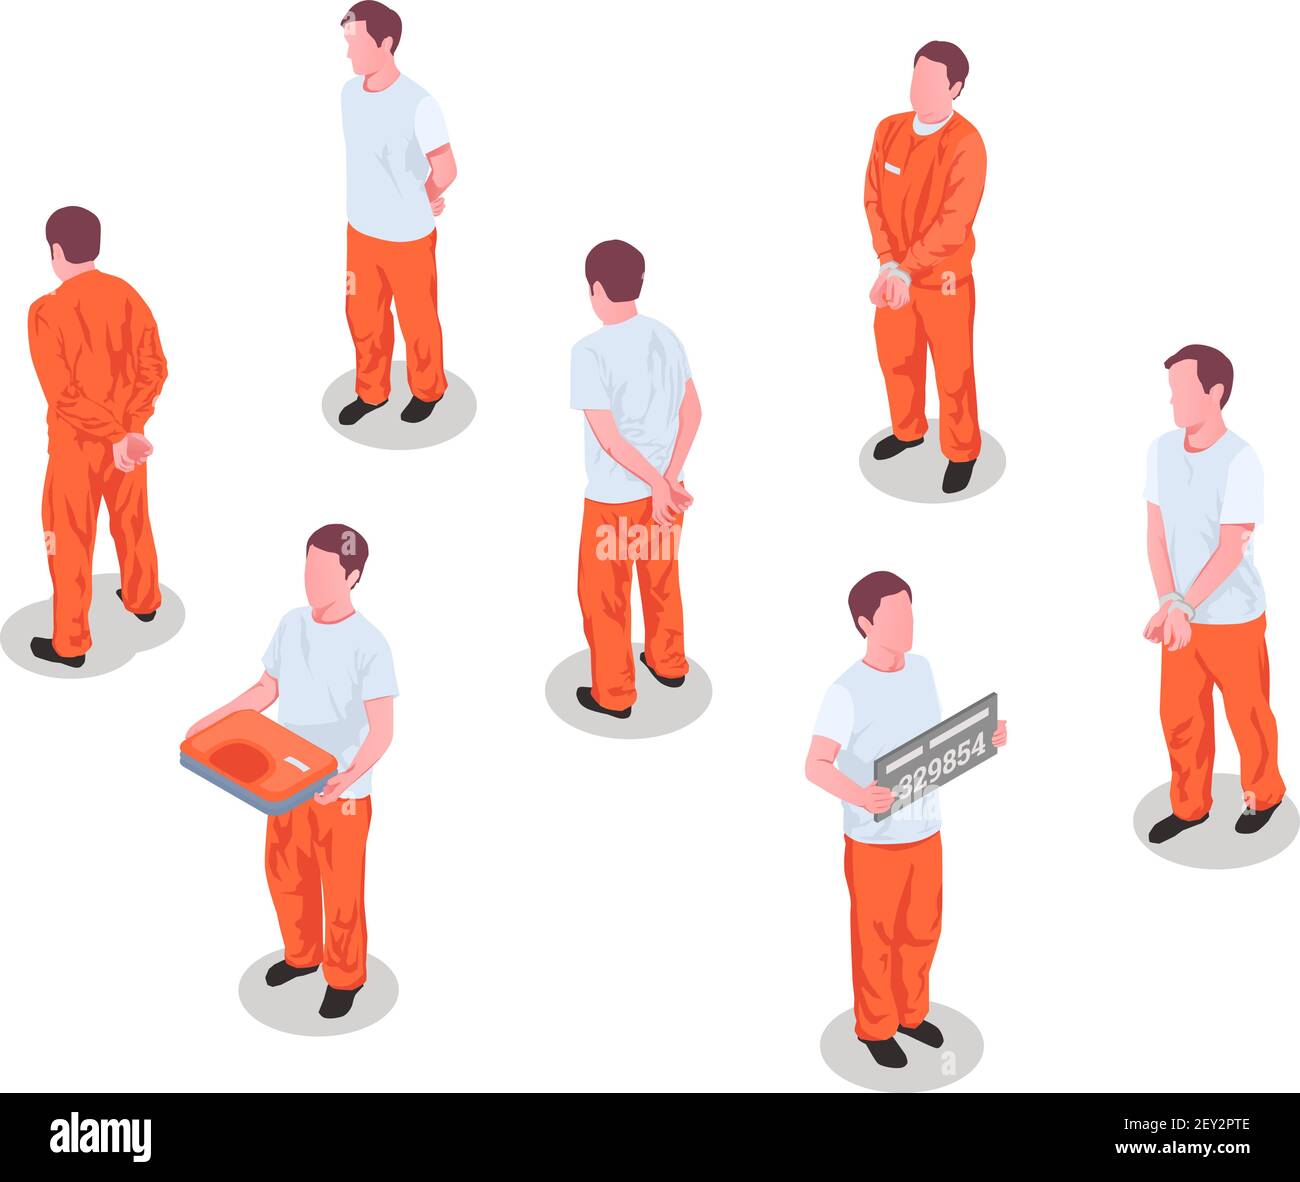 Jail inmates criminals arrested incarcerated persons male characters in prison detainee uniform isometric set isolated vector illustration Stock Vector